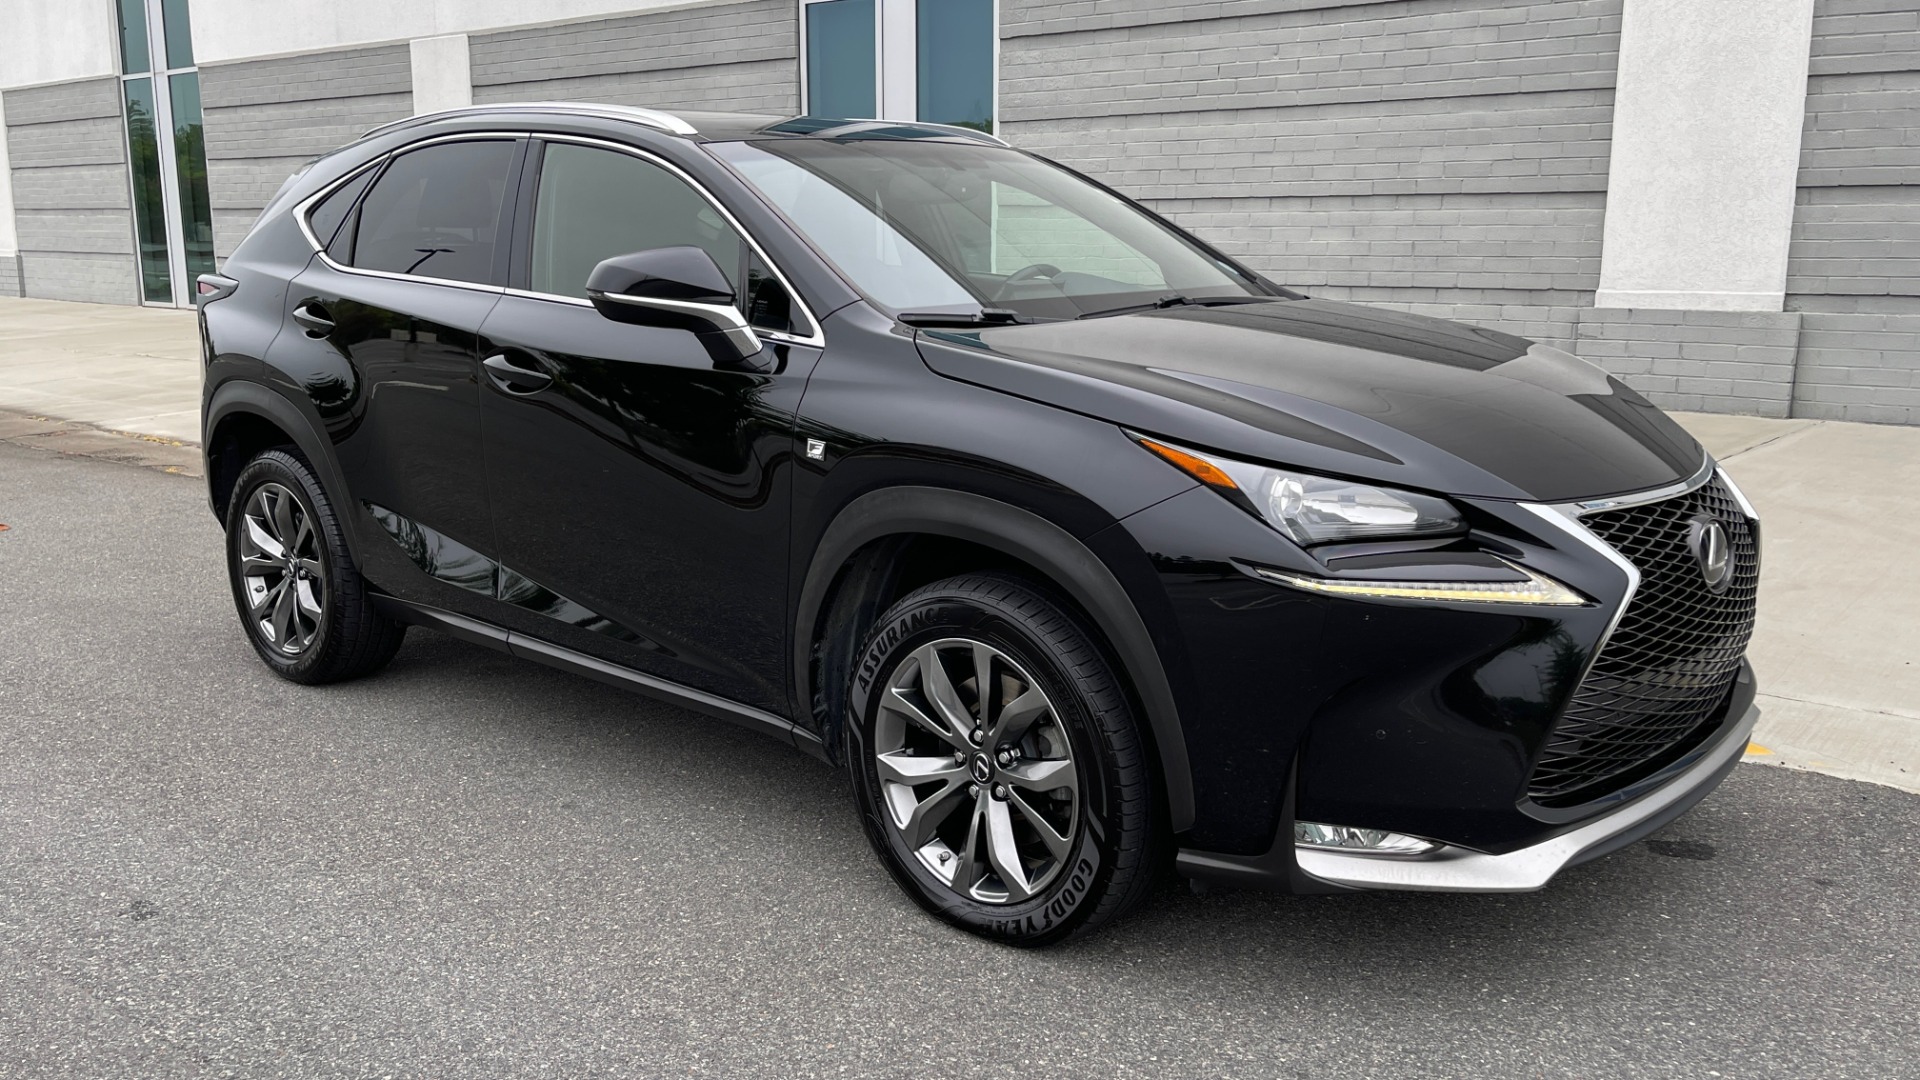 Used 2017 Lexus NX PREMIUM F-SPORT / 2.0L TURBO / BSM / PARK ASST / REARVIEW for sale Sold at Formula Imports in Charlotte NC 28227 6